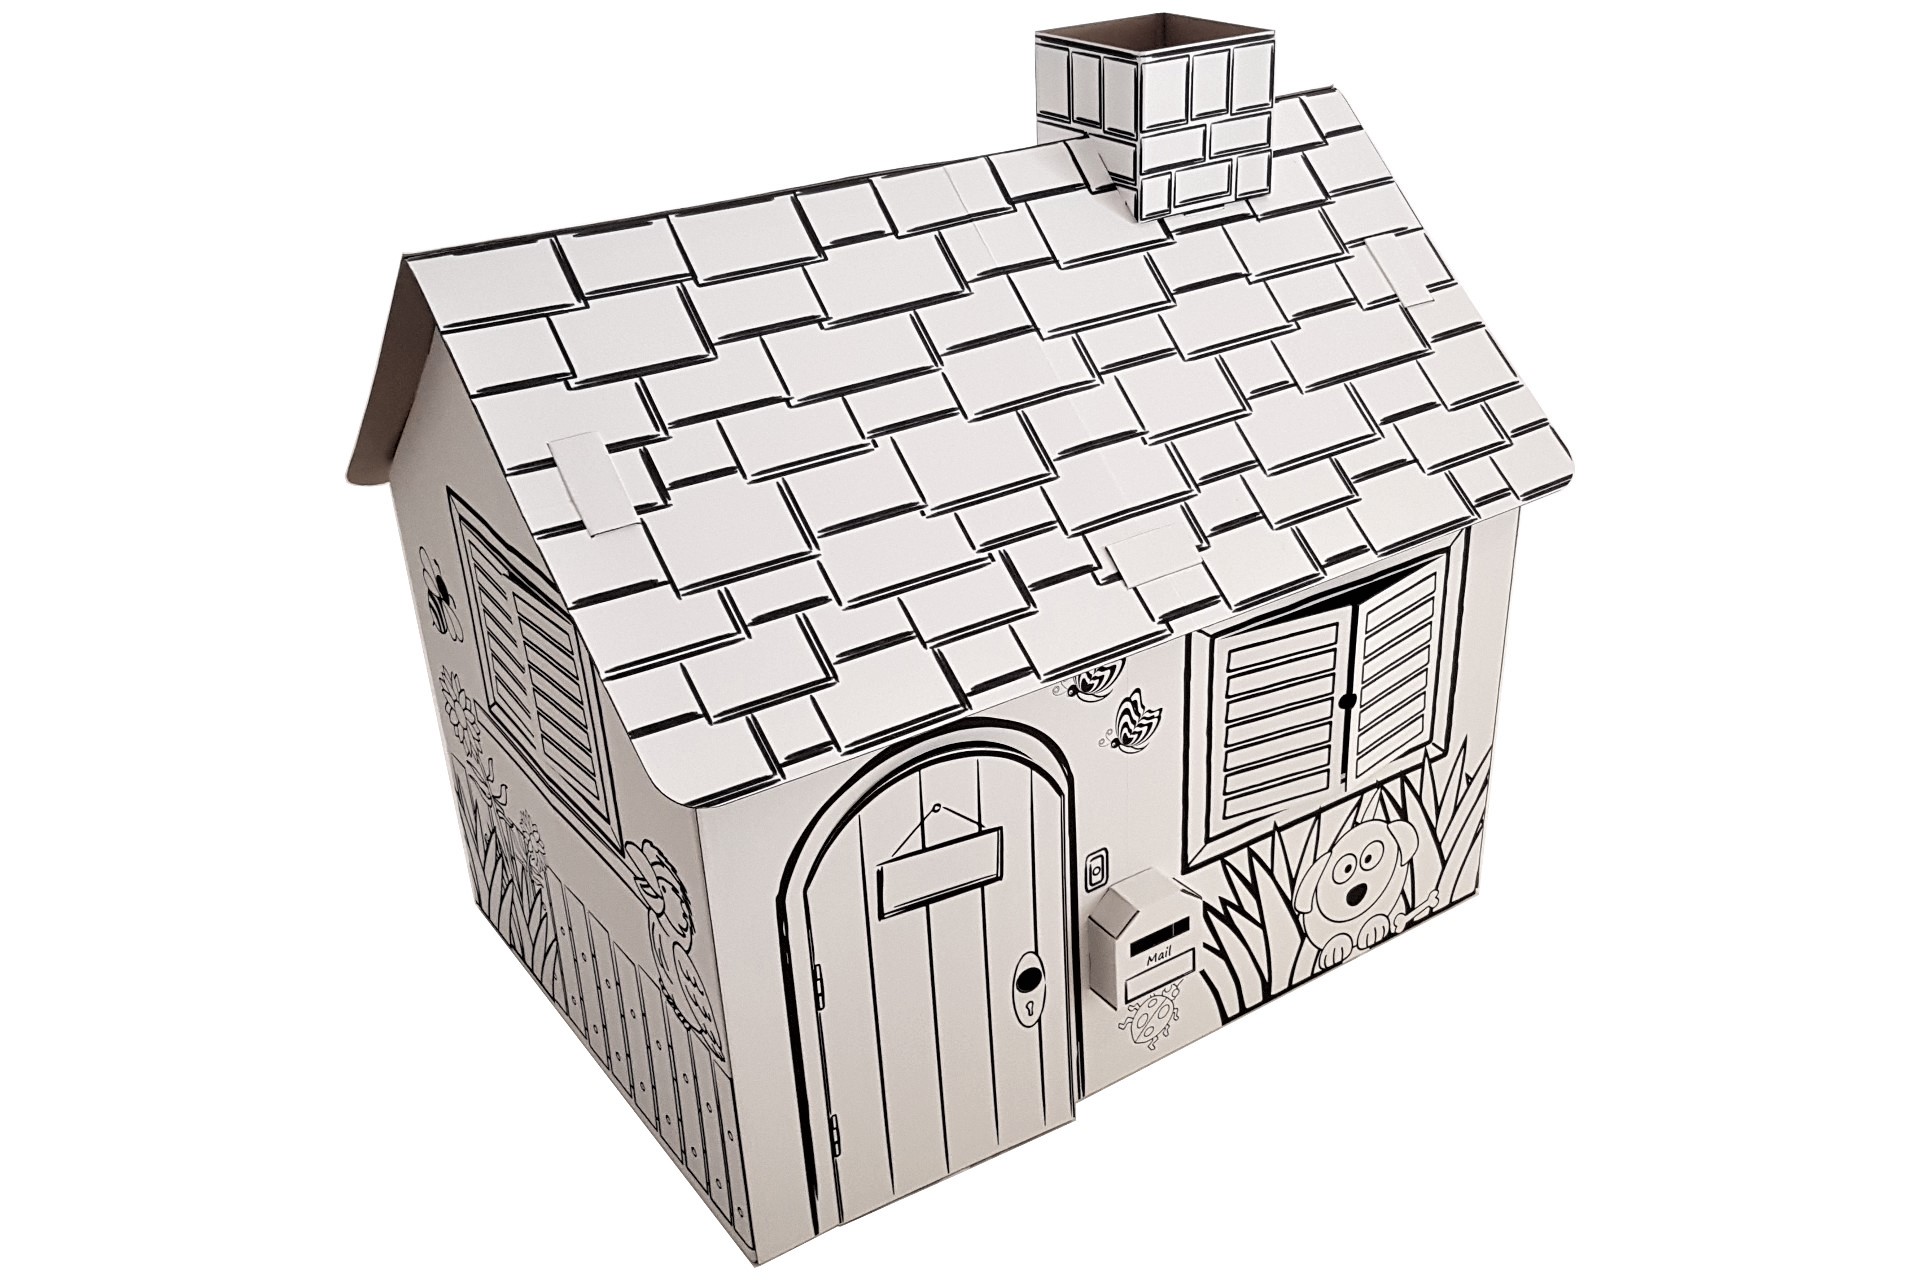 Bodey Cardboard Cubby House - Close-Up